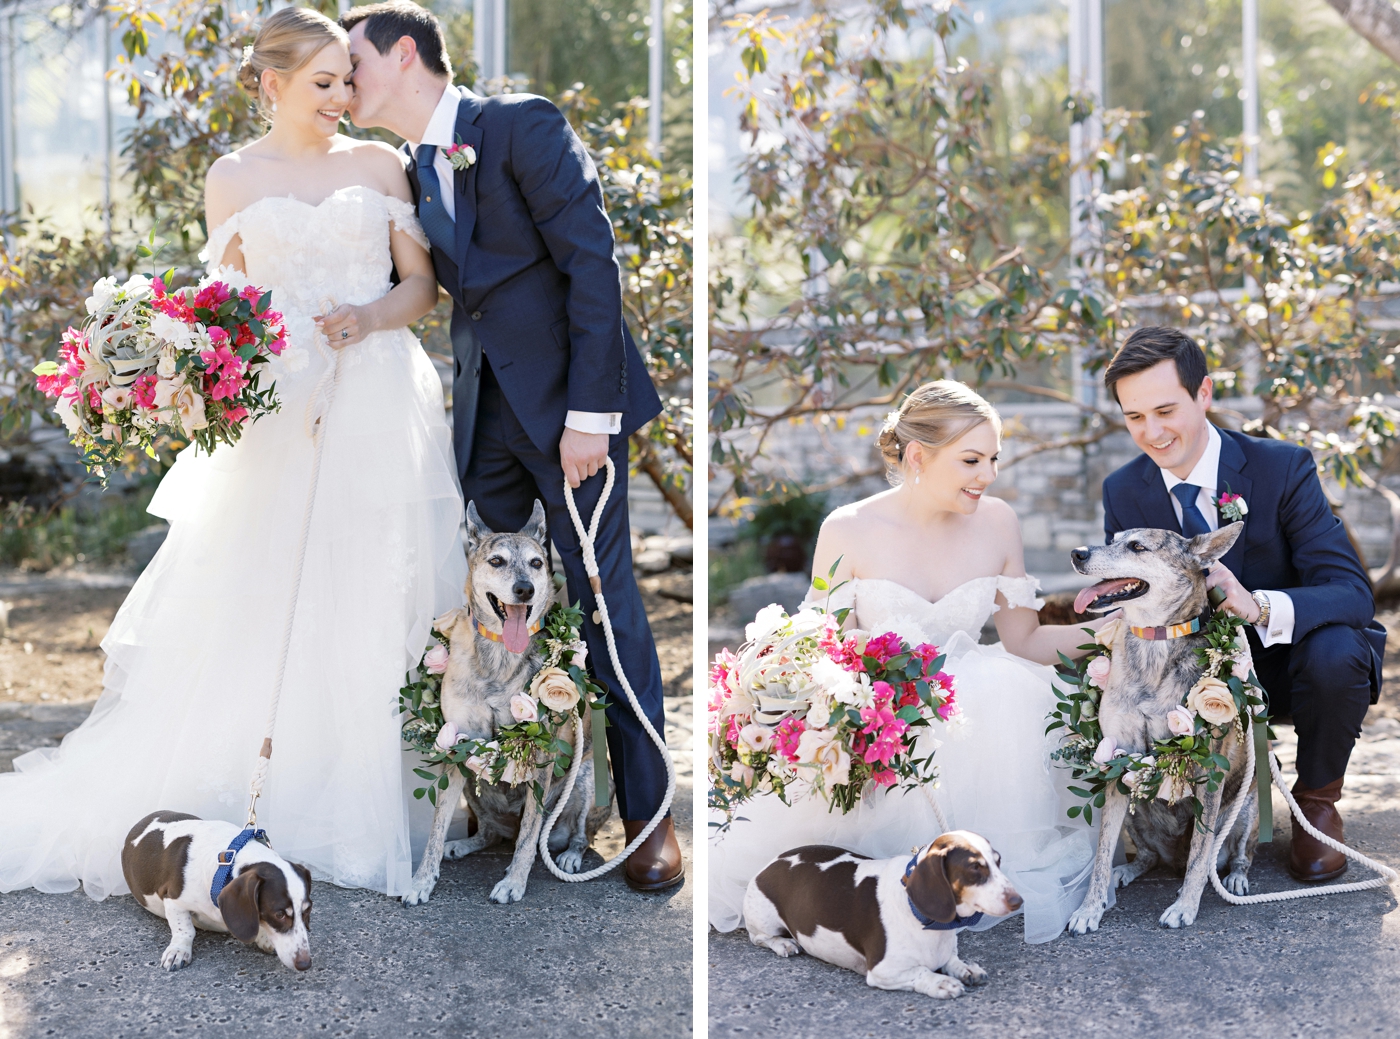 10 Ways To Include Your Dog On Your Wedding Day